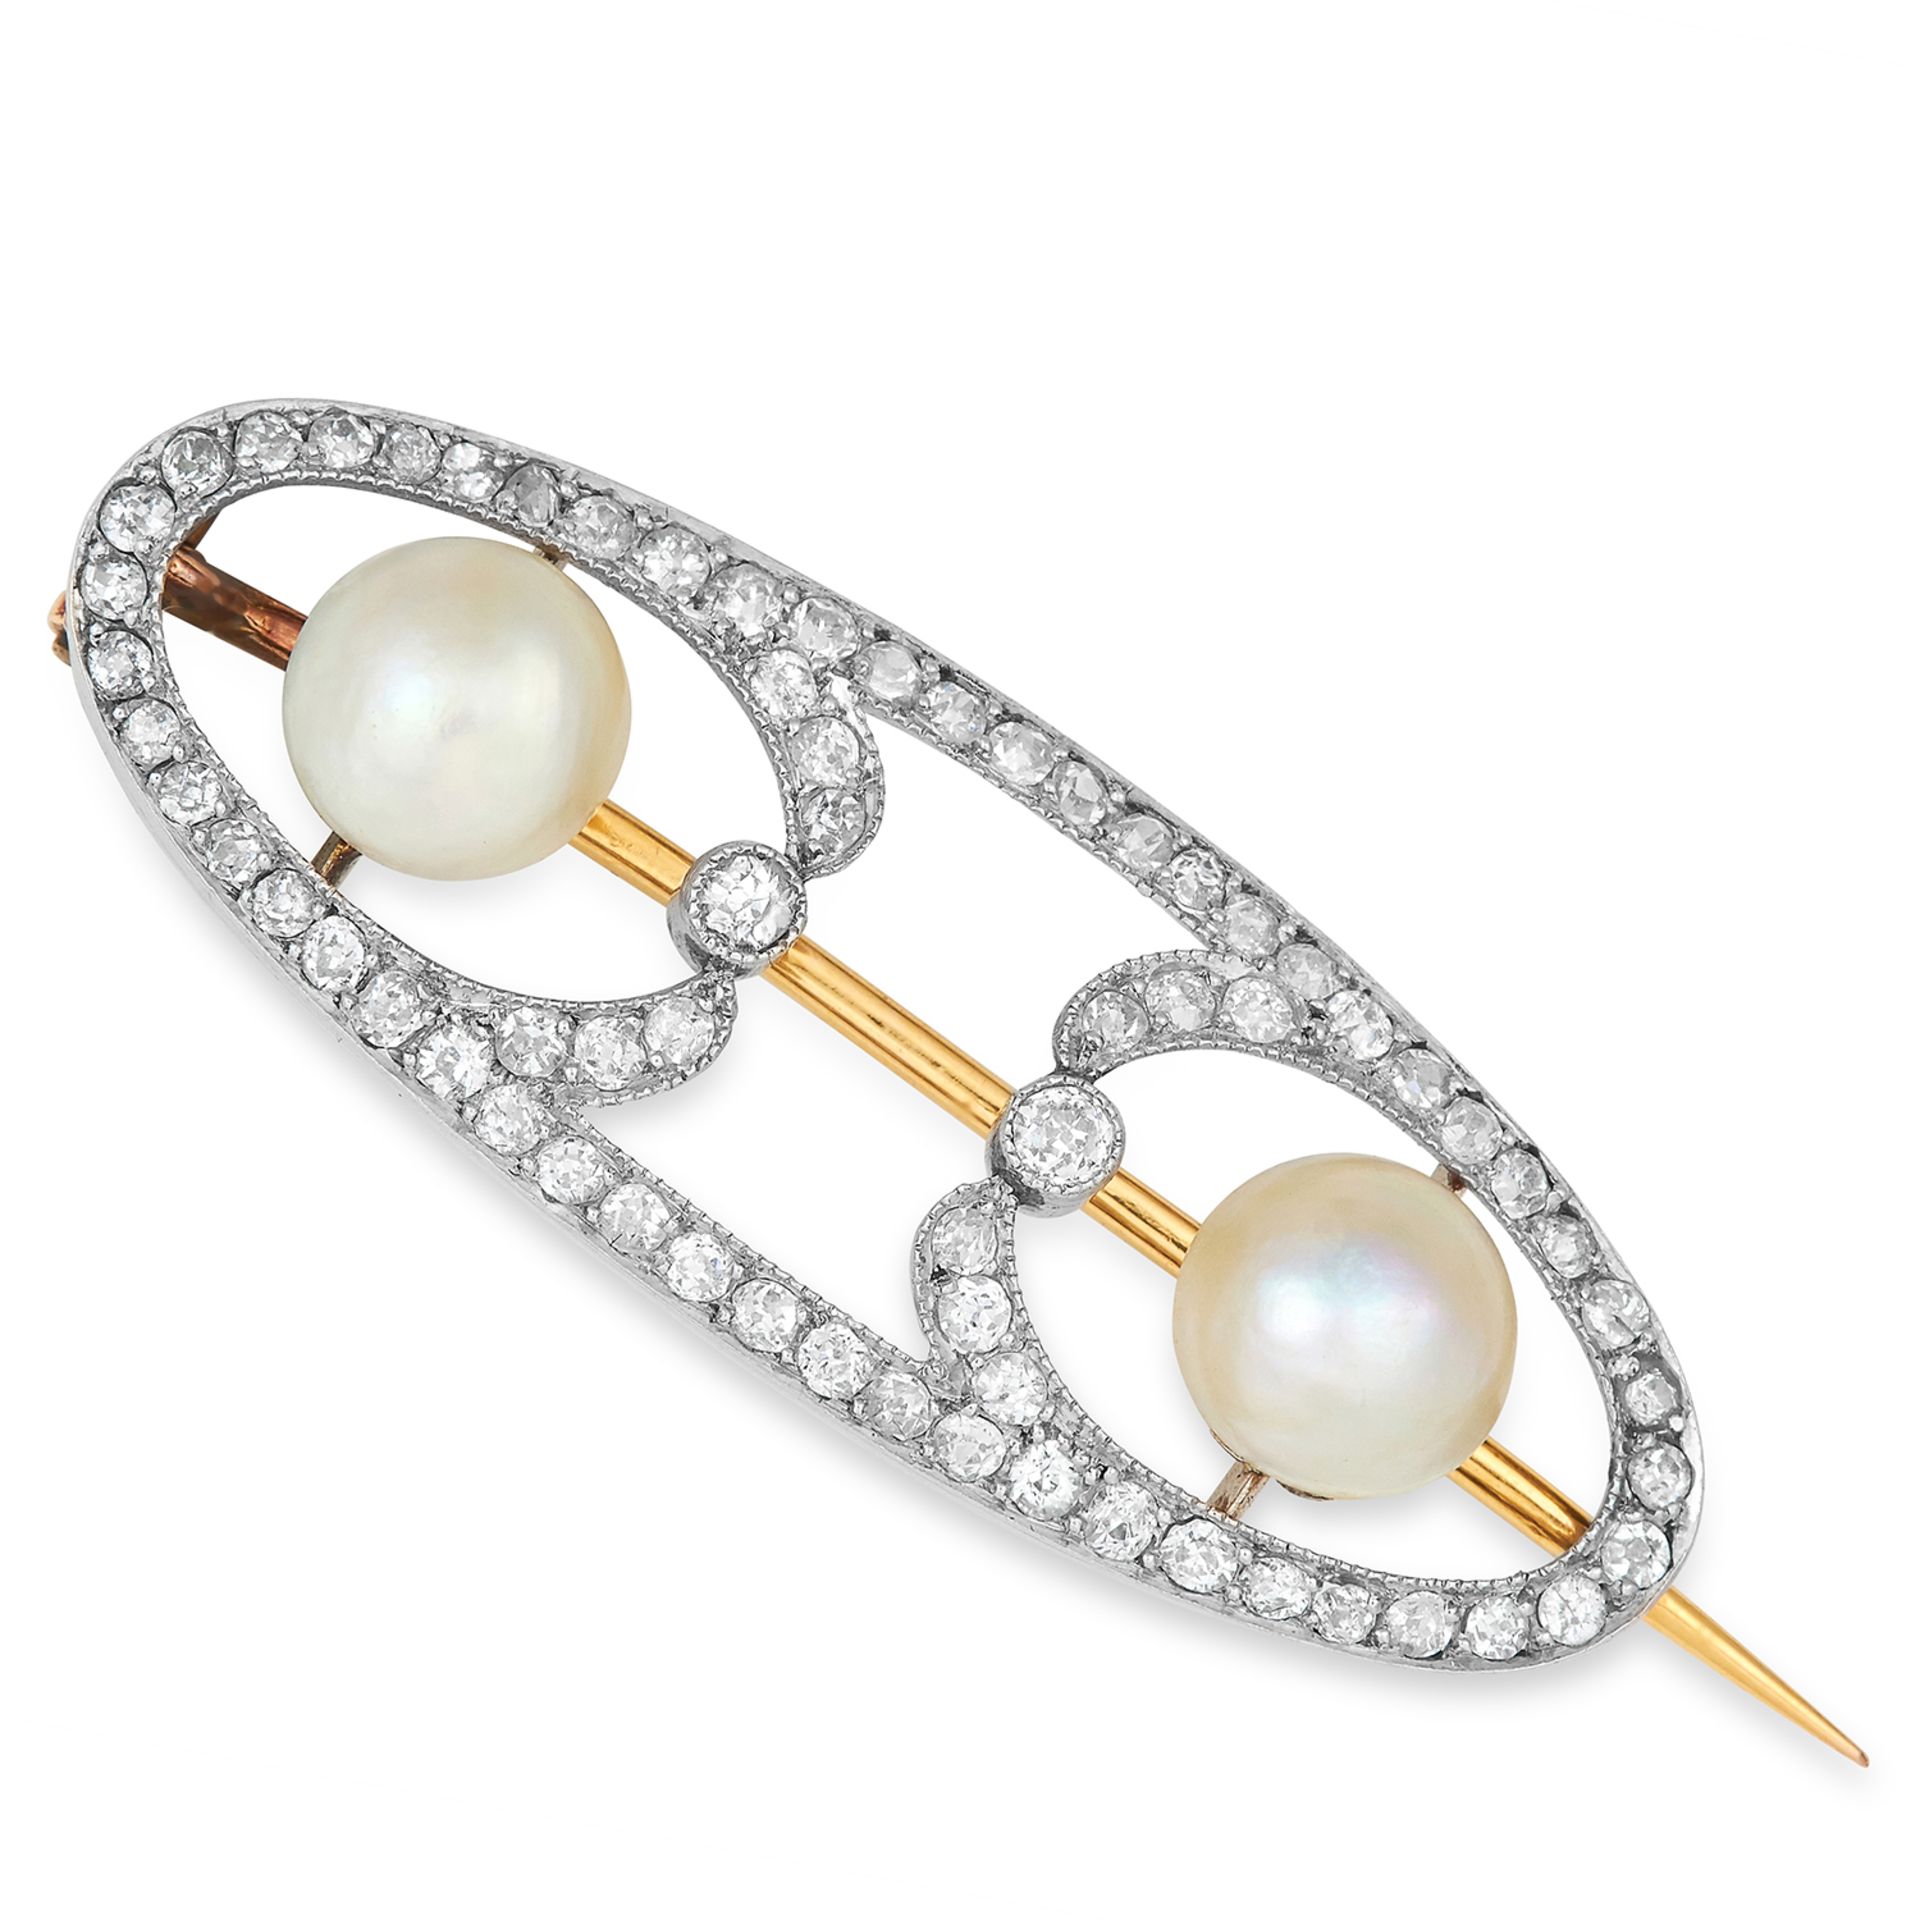 ART NOUVEAU DIAMOND AND PEARL BROOCH set with old cut diamonds and two pearls, possibly natural,